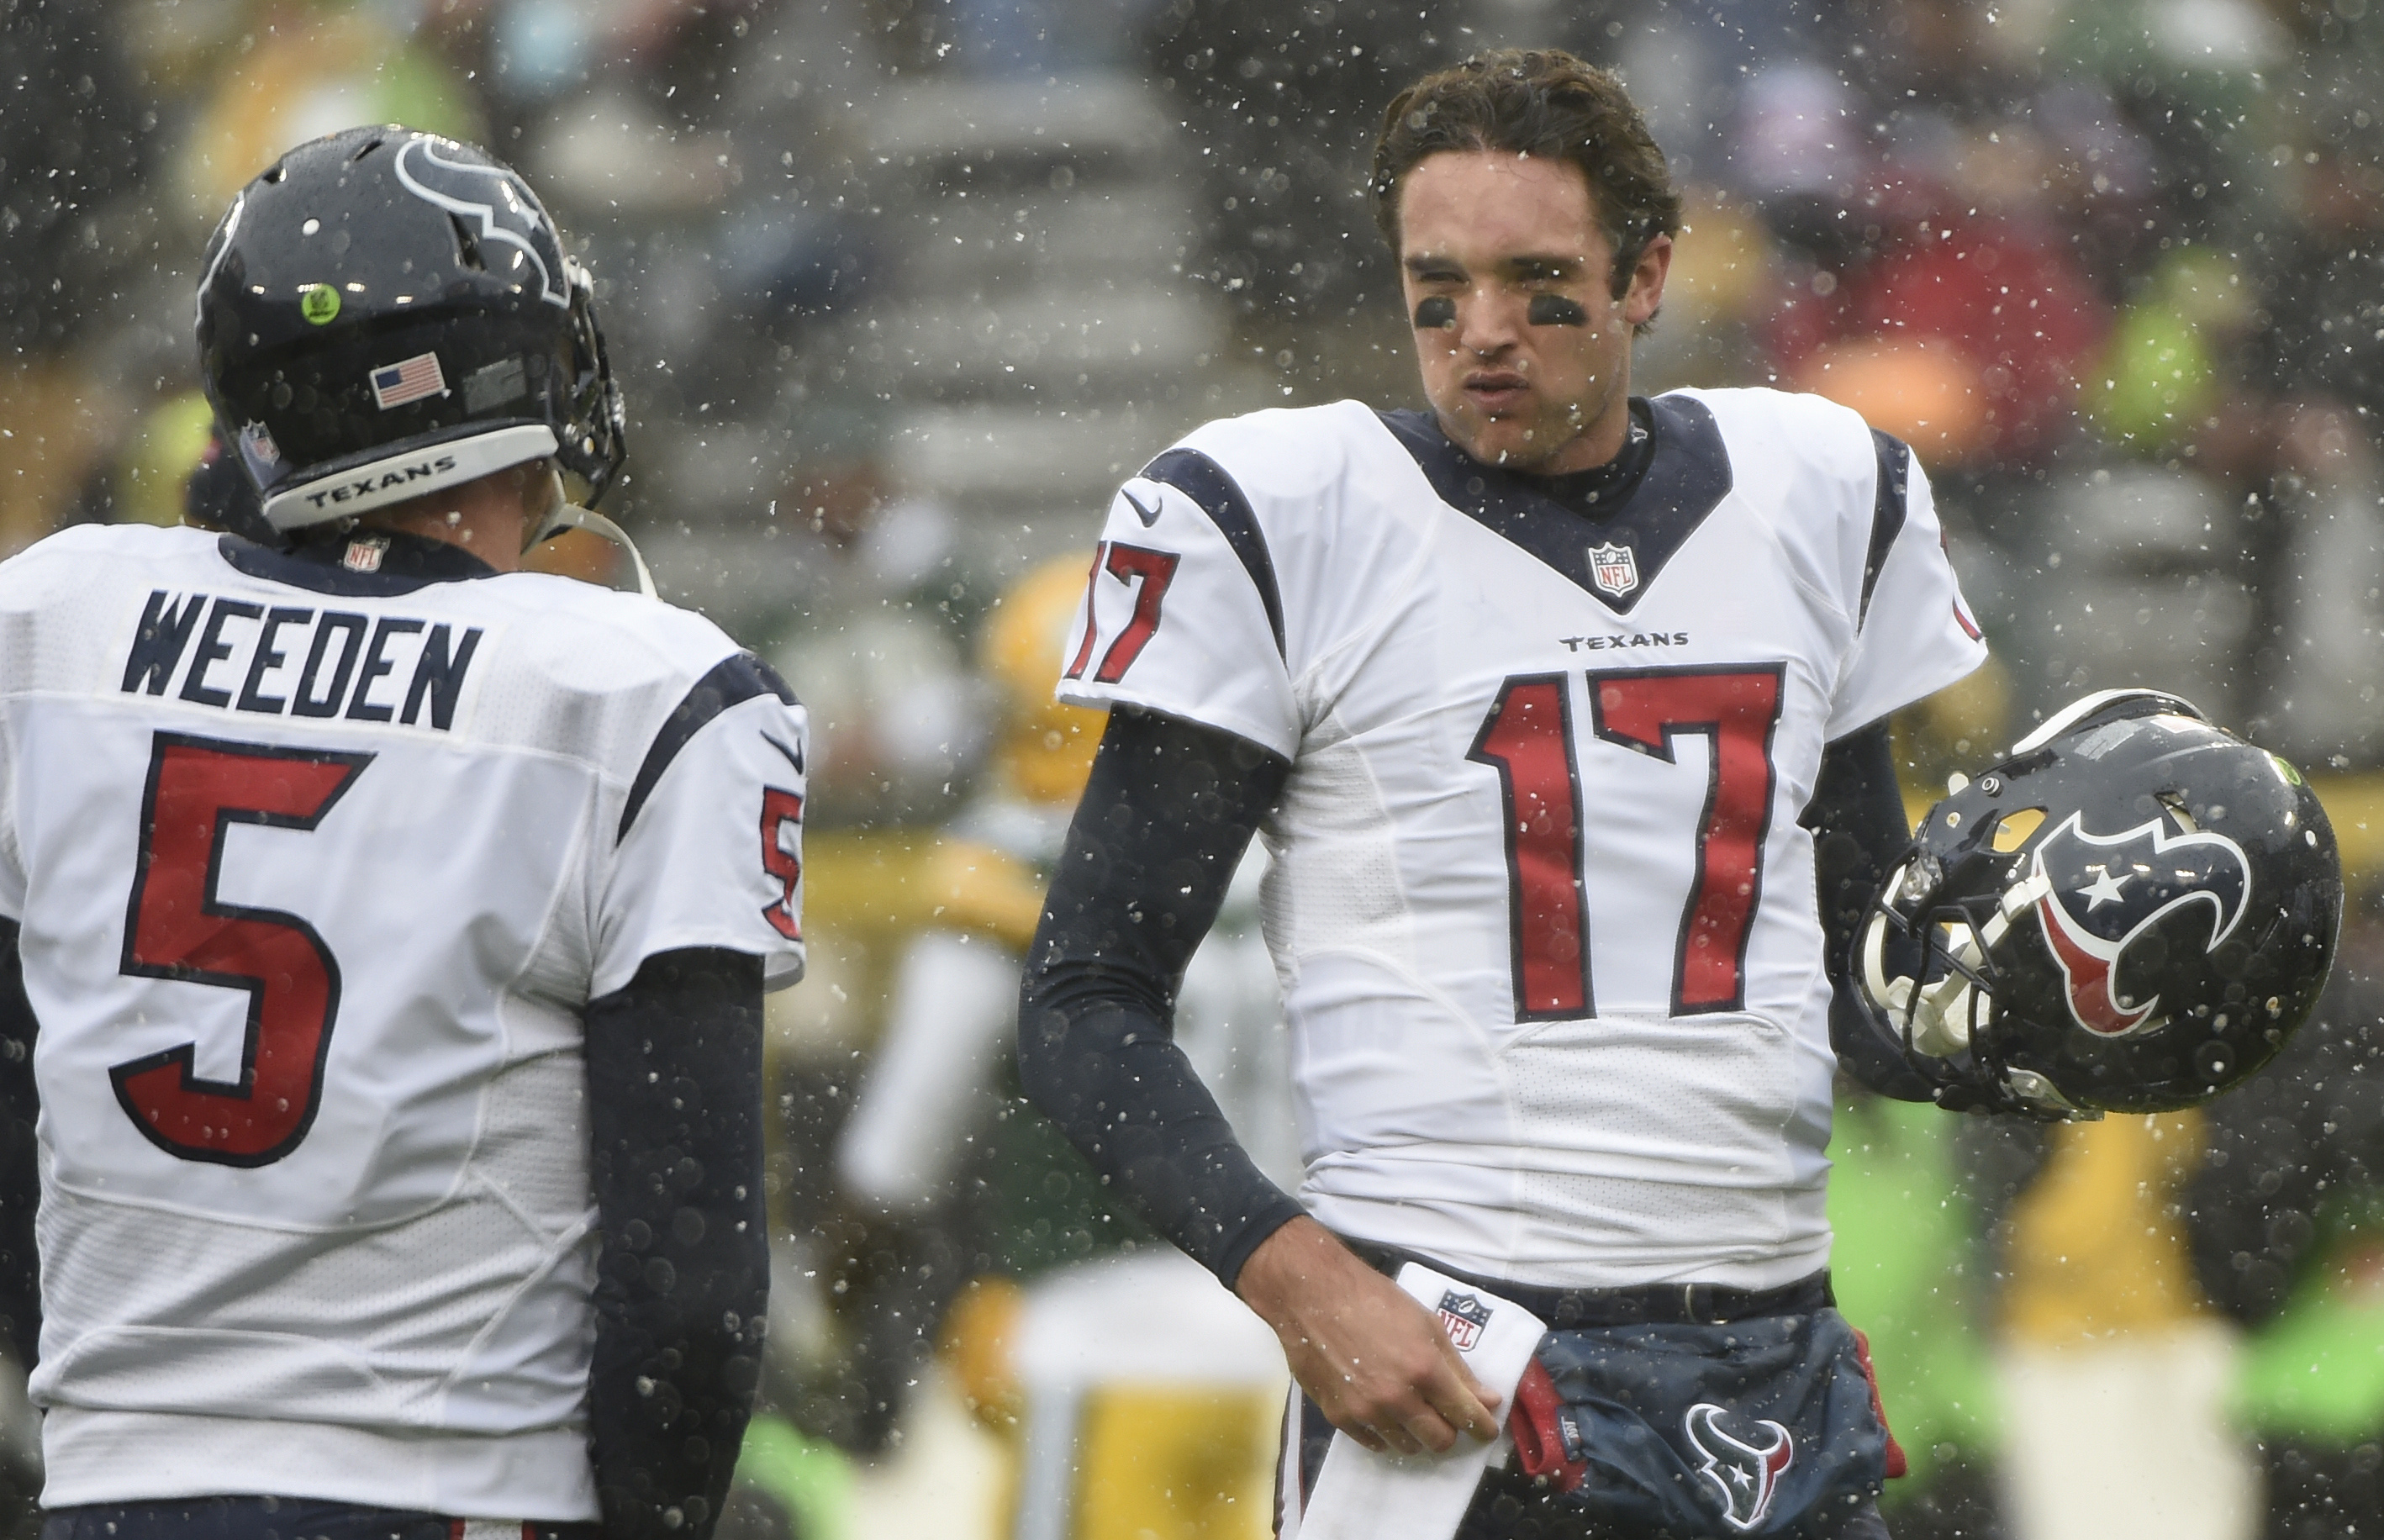 NFL: Houston Texans at Green Bay Packers